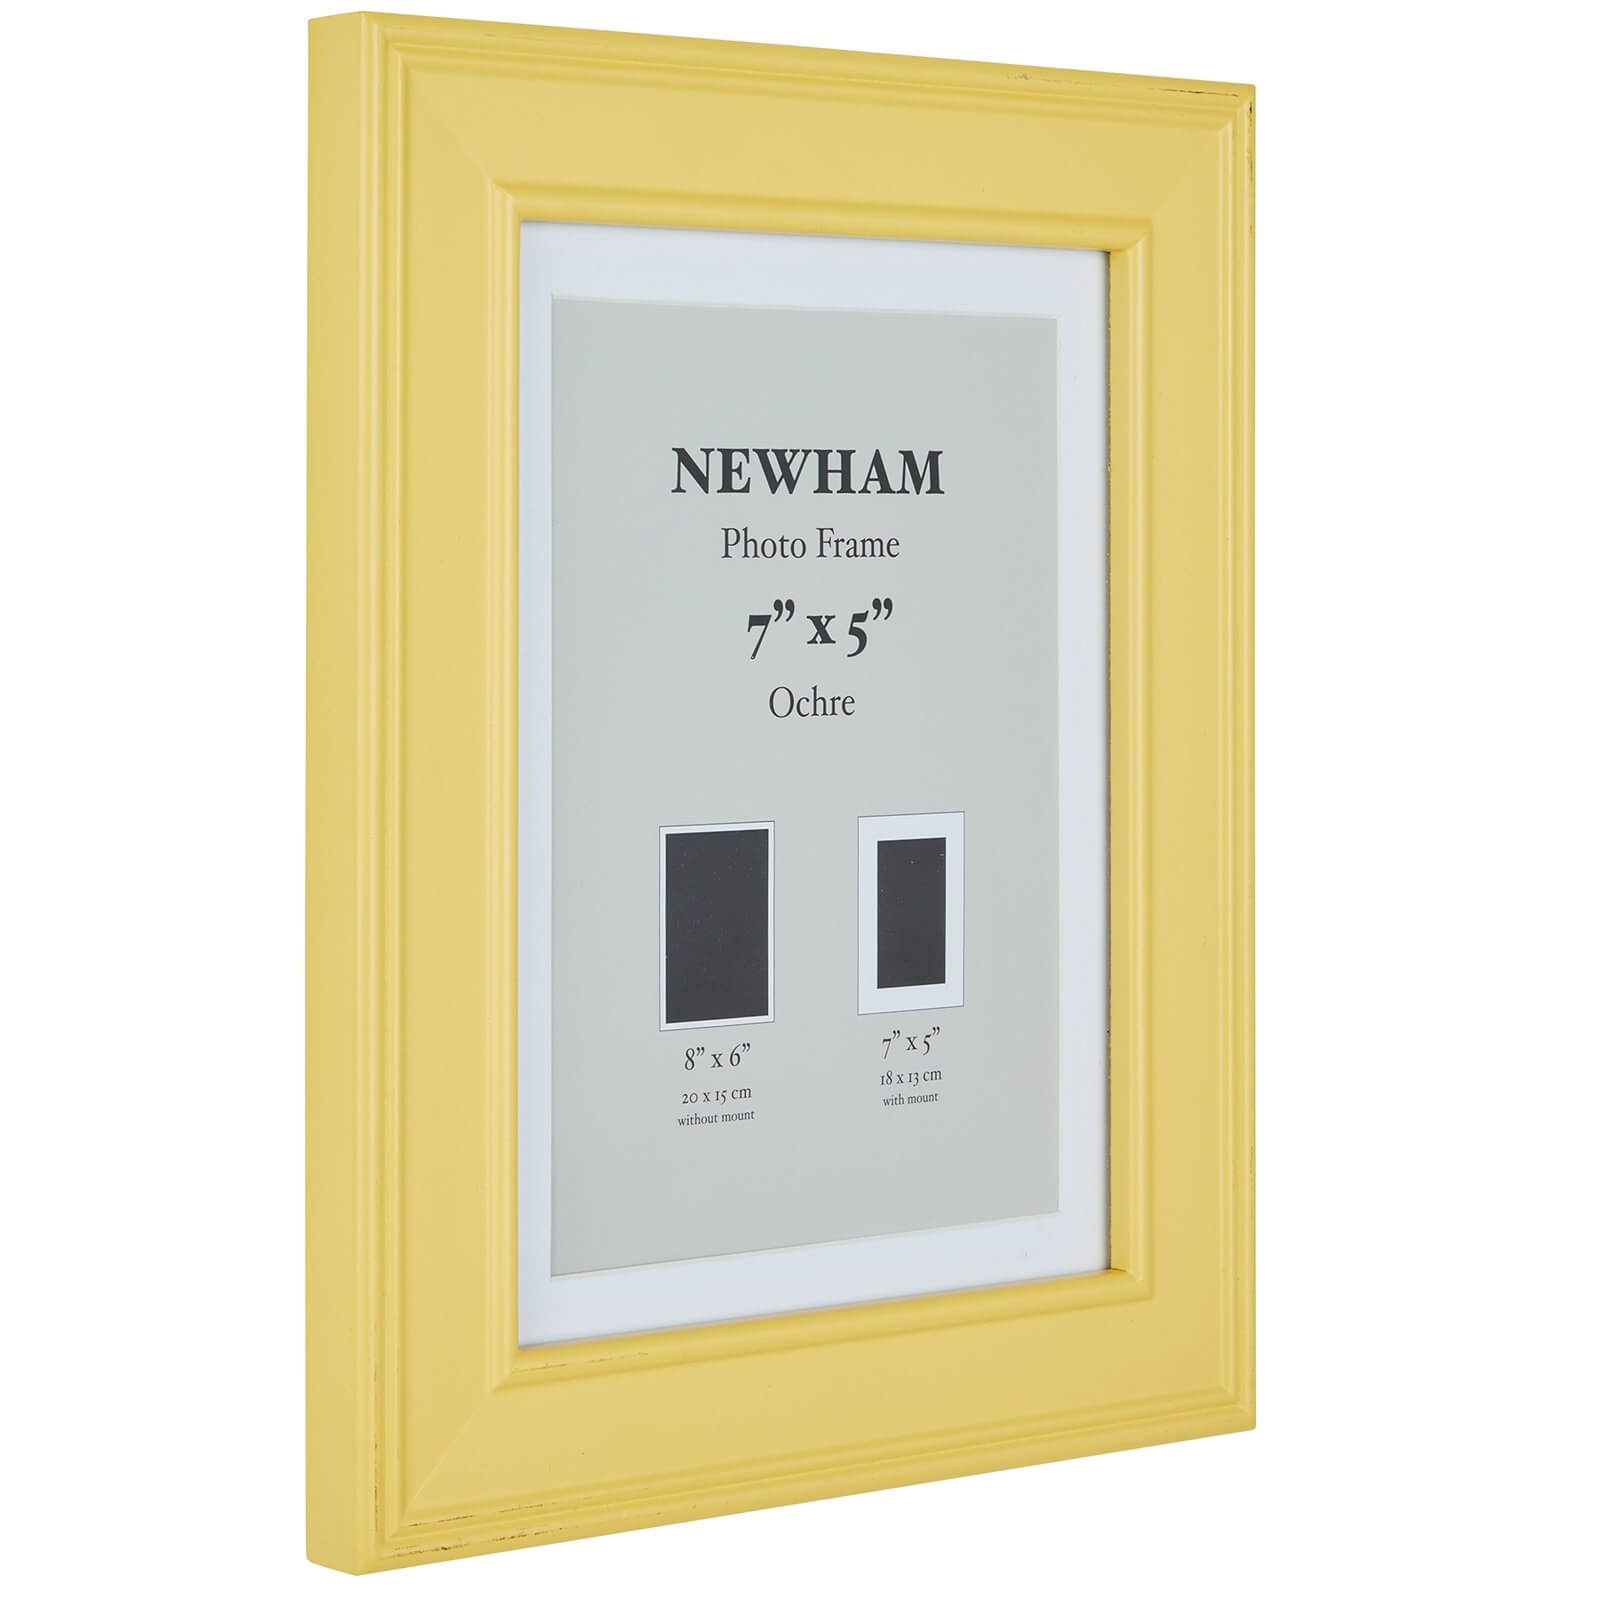 Newham Picture Frame 7 x 5 - Ochre